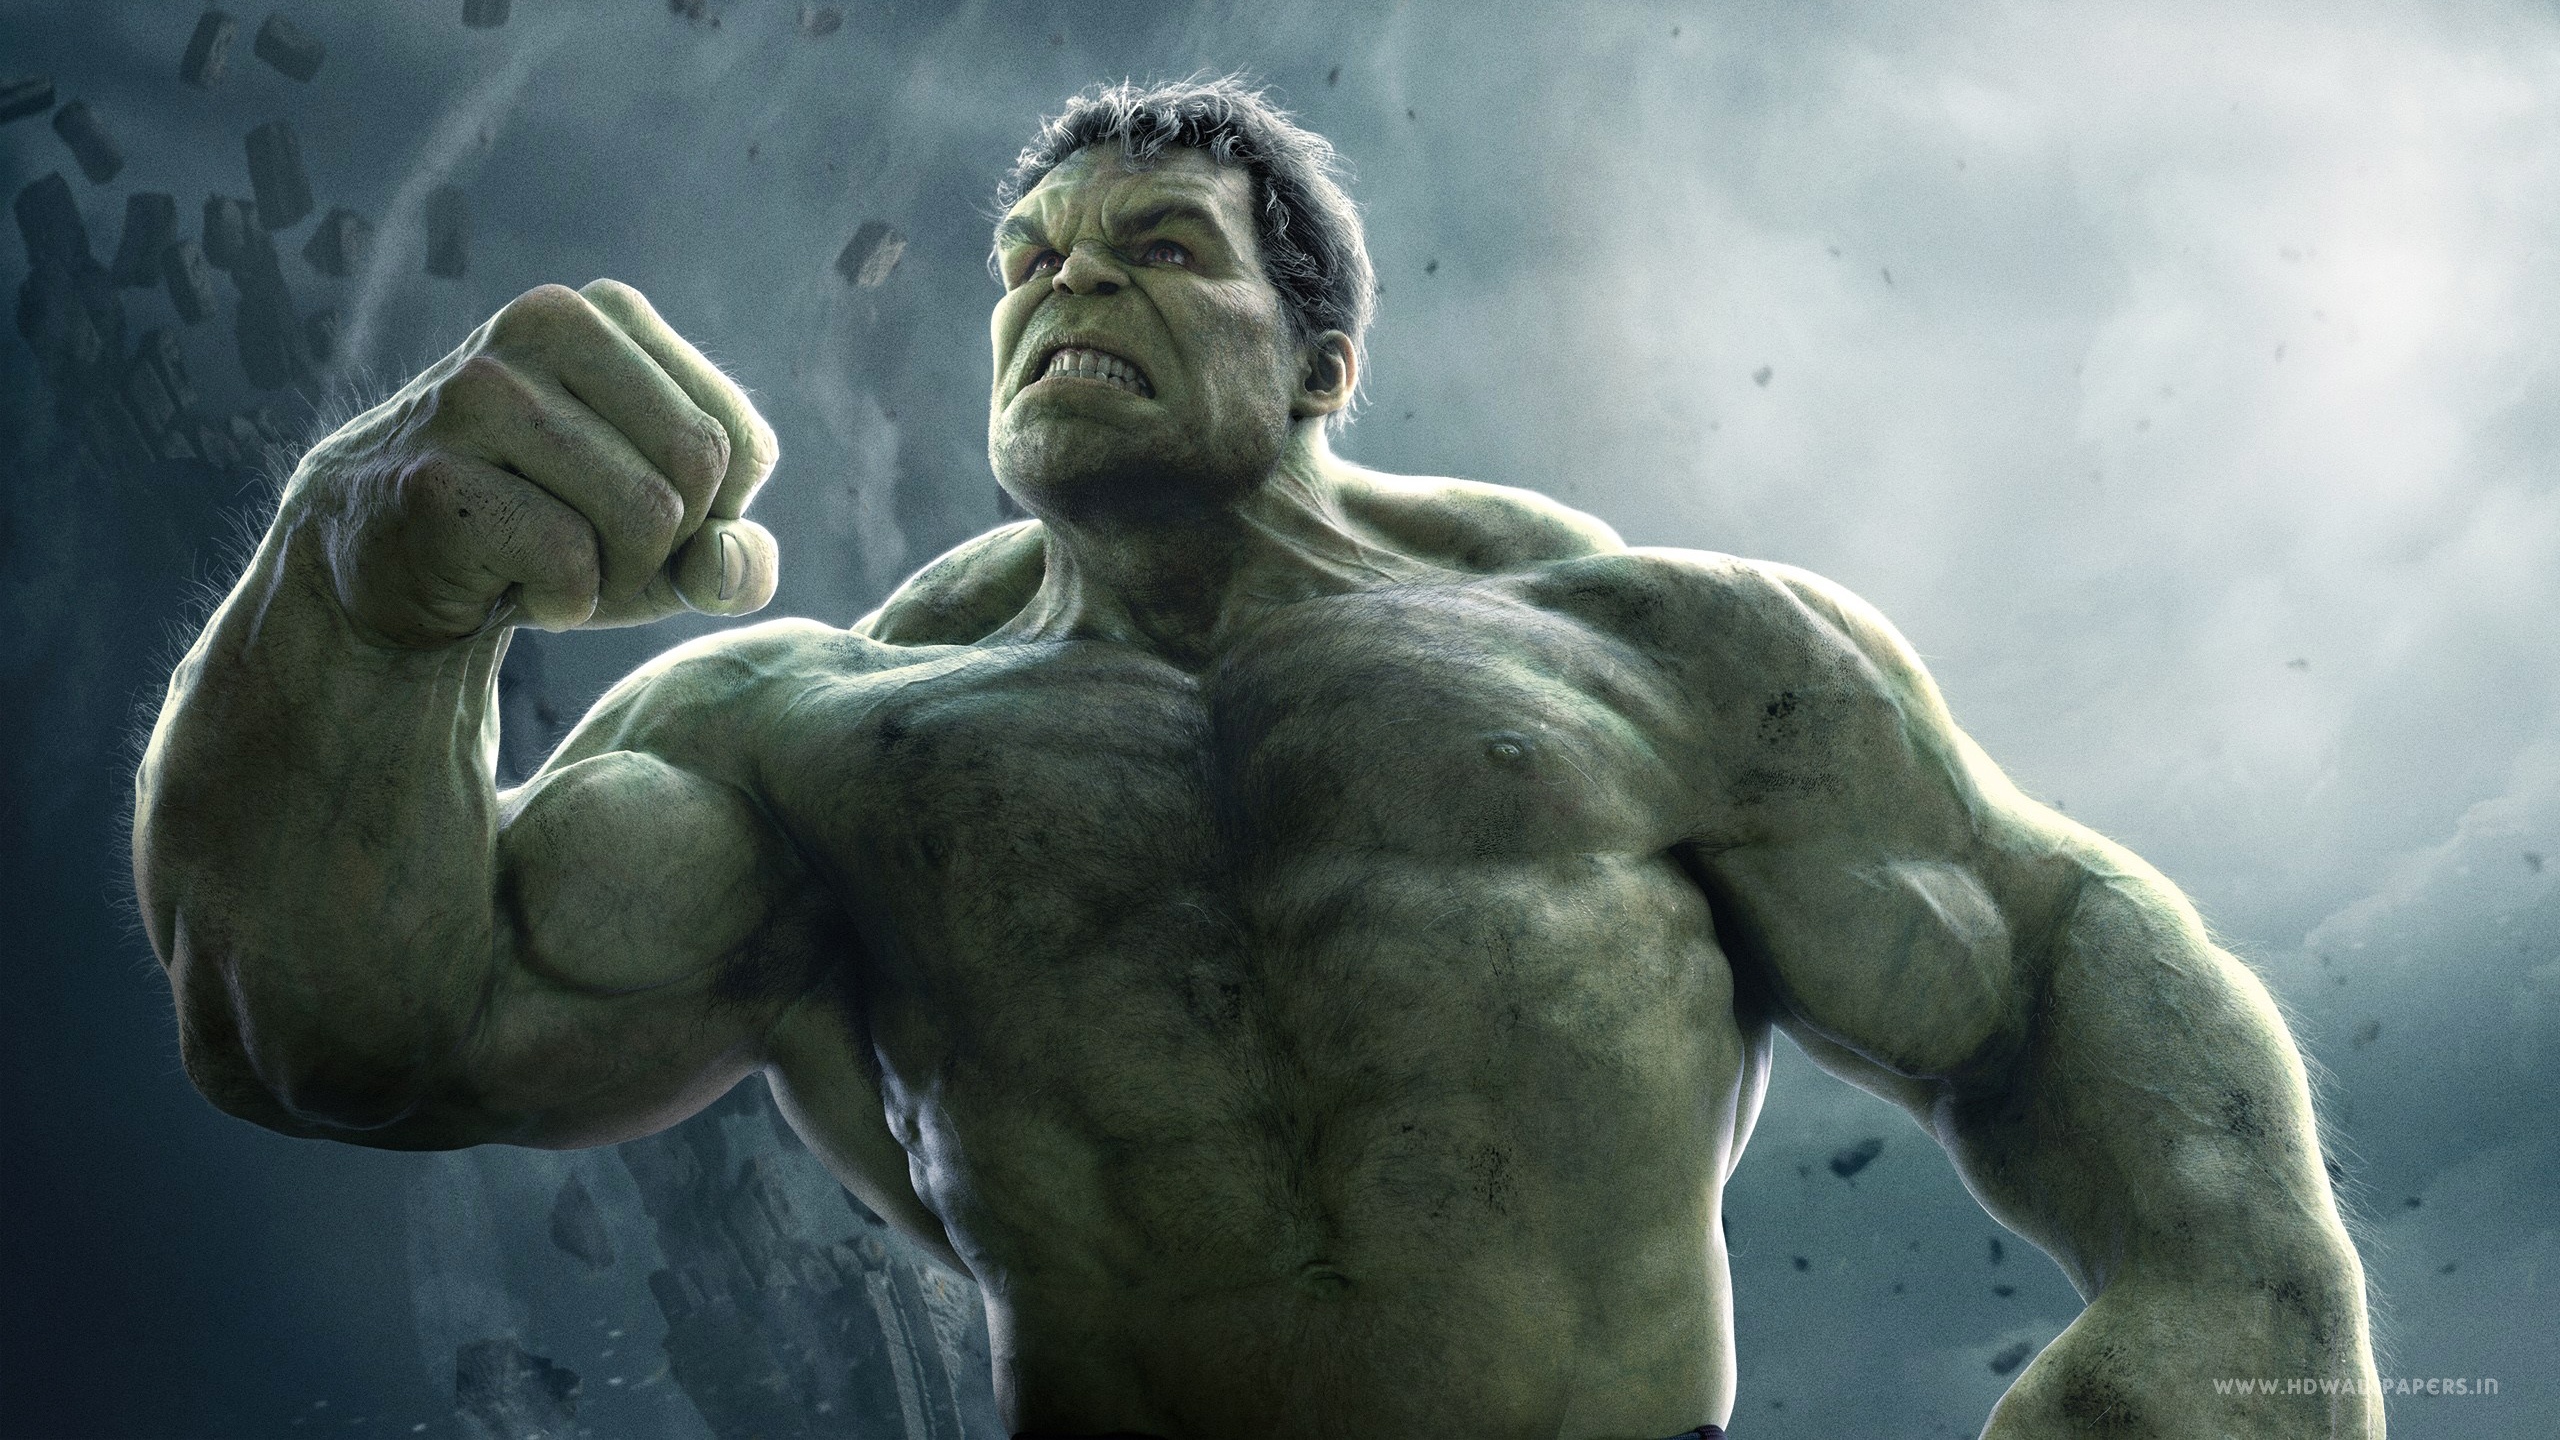 Avengers Age of Ultron Hulk Wallpaper in jpg format for free download